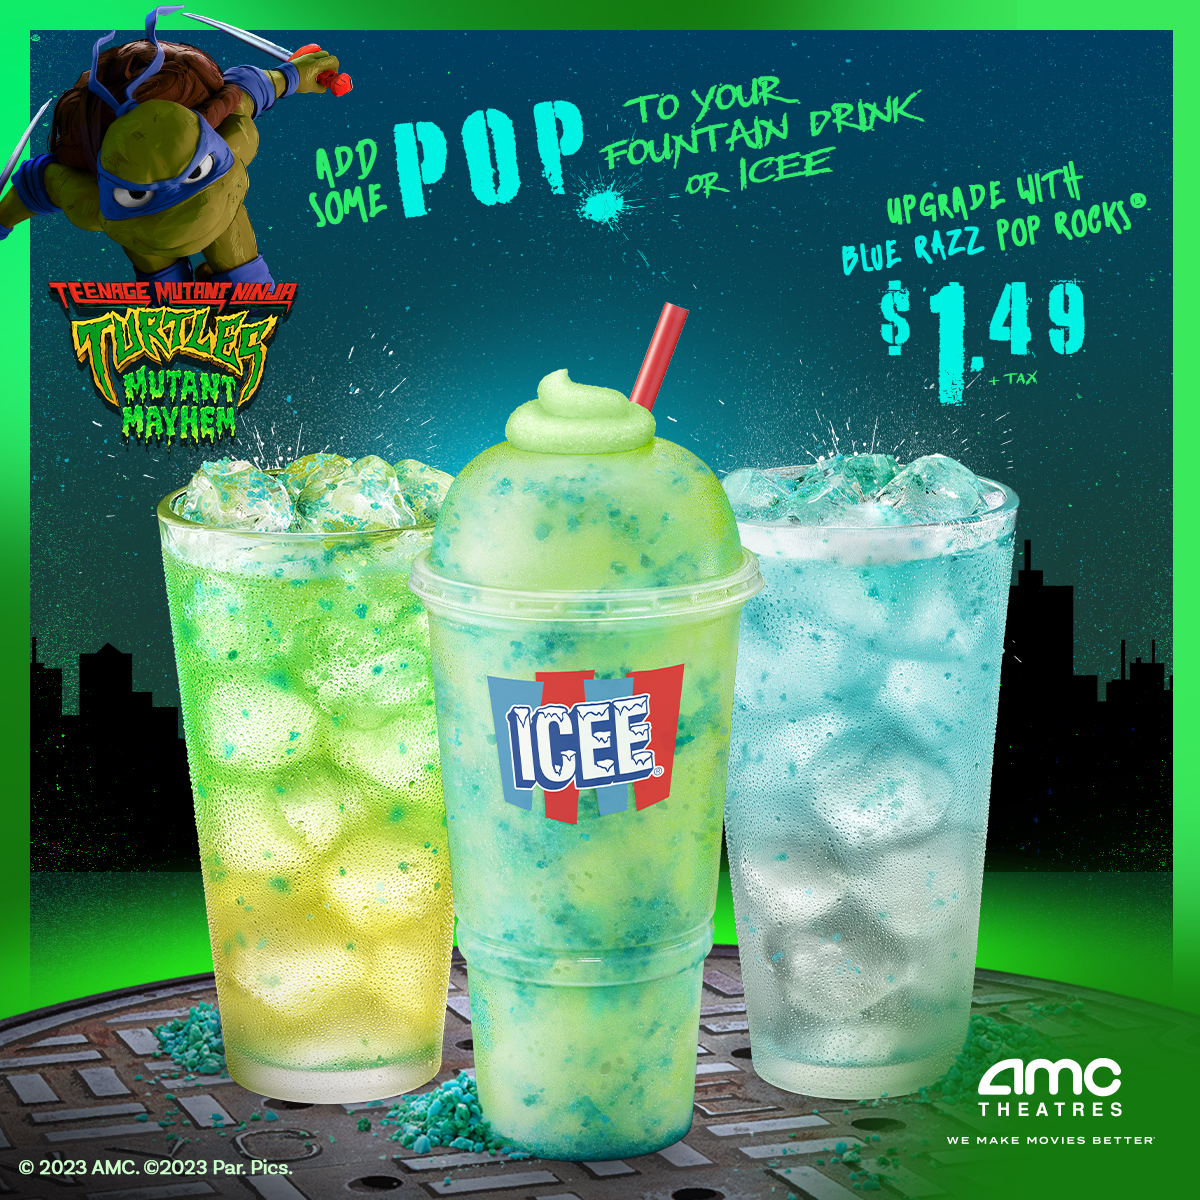 The SHELL SHOCKER #ICEE is now available at #AMCTheatres! Slurp on